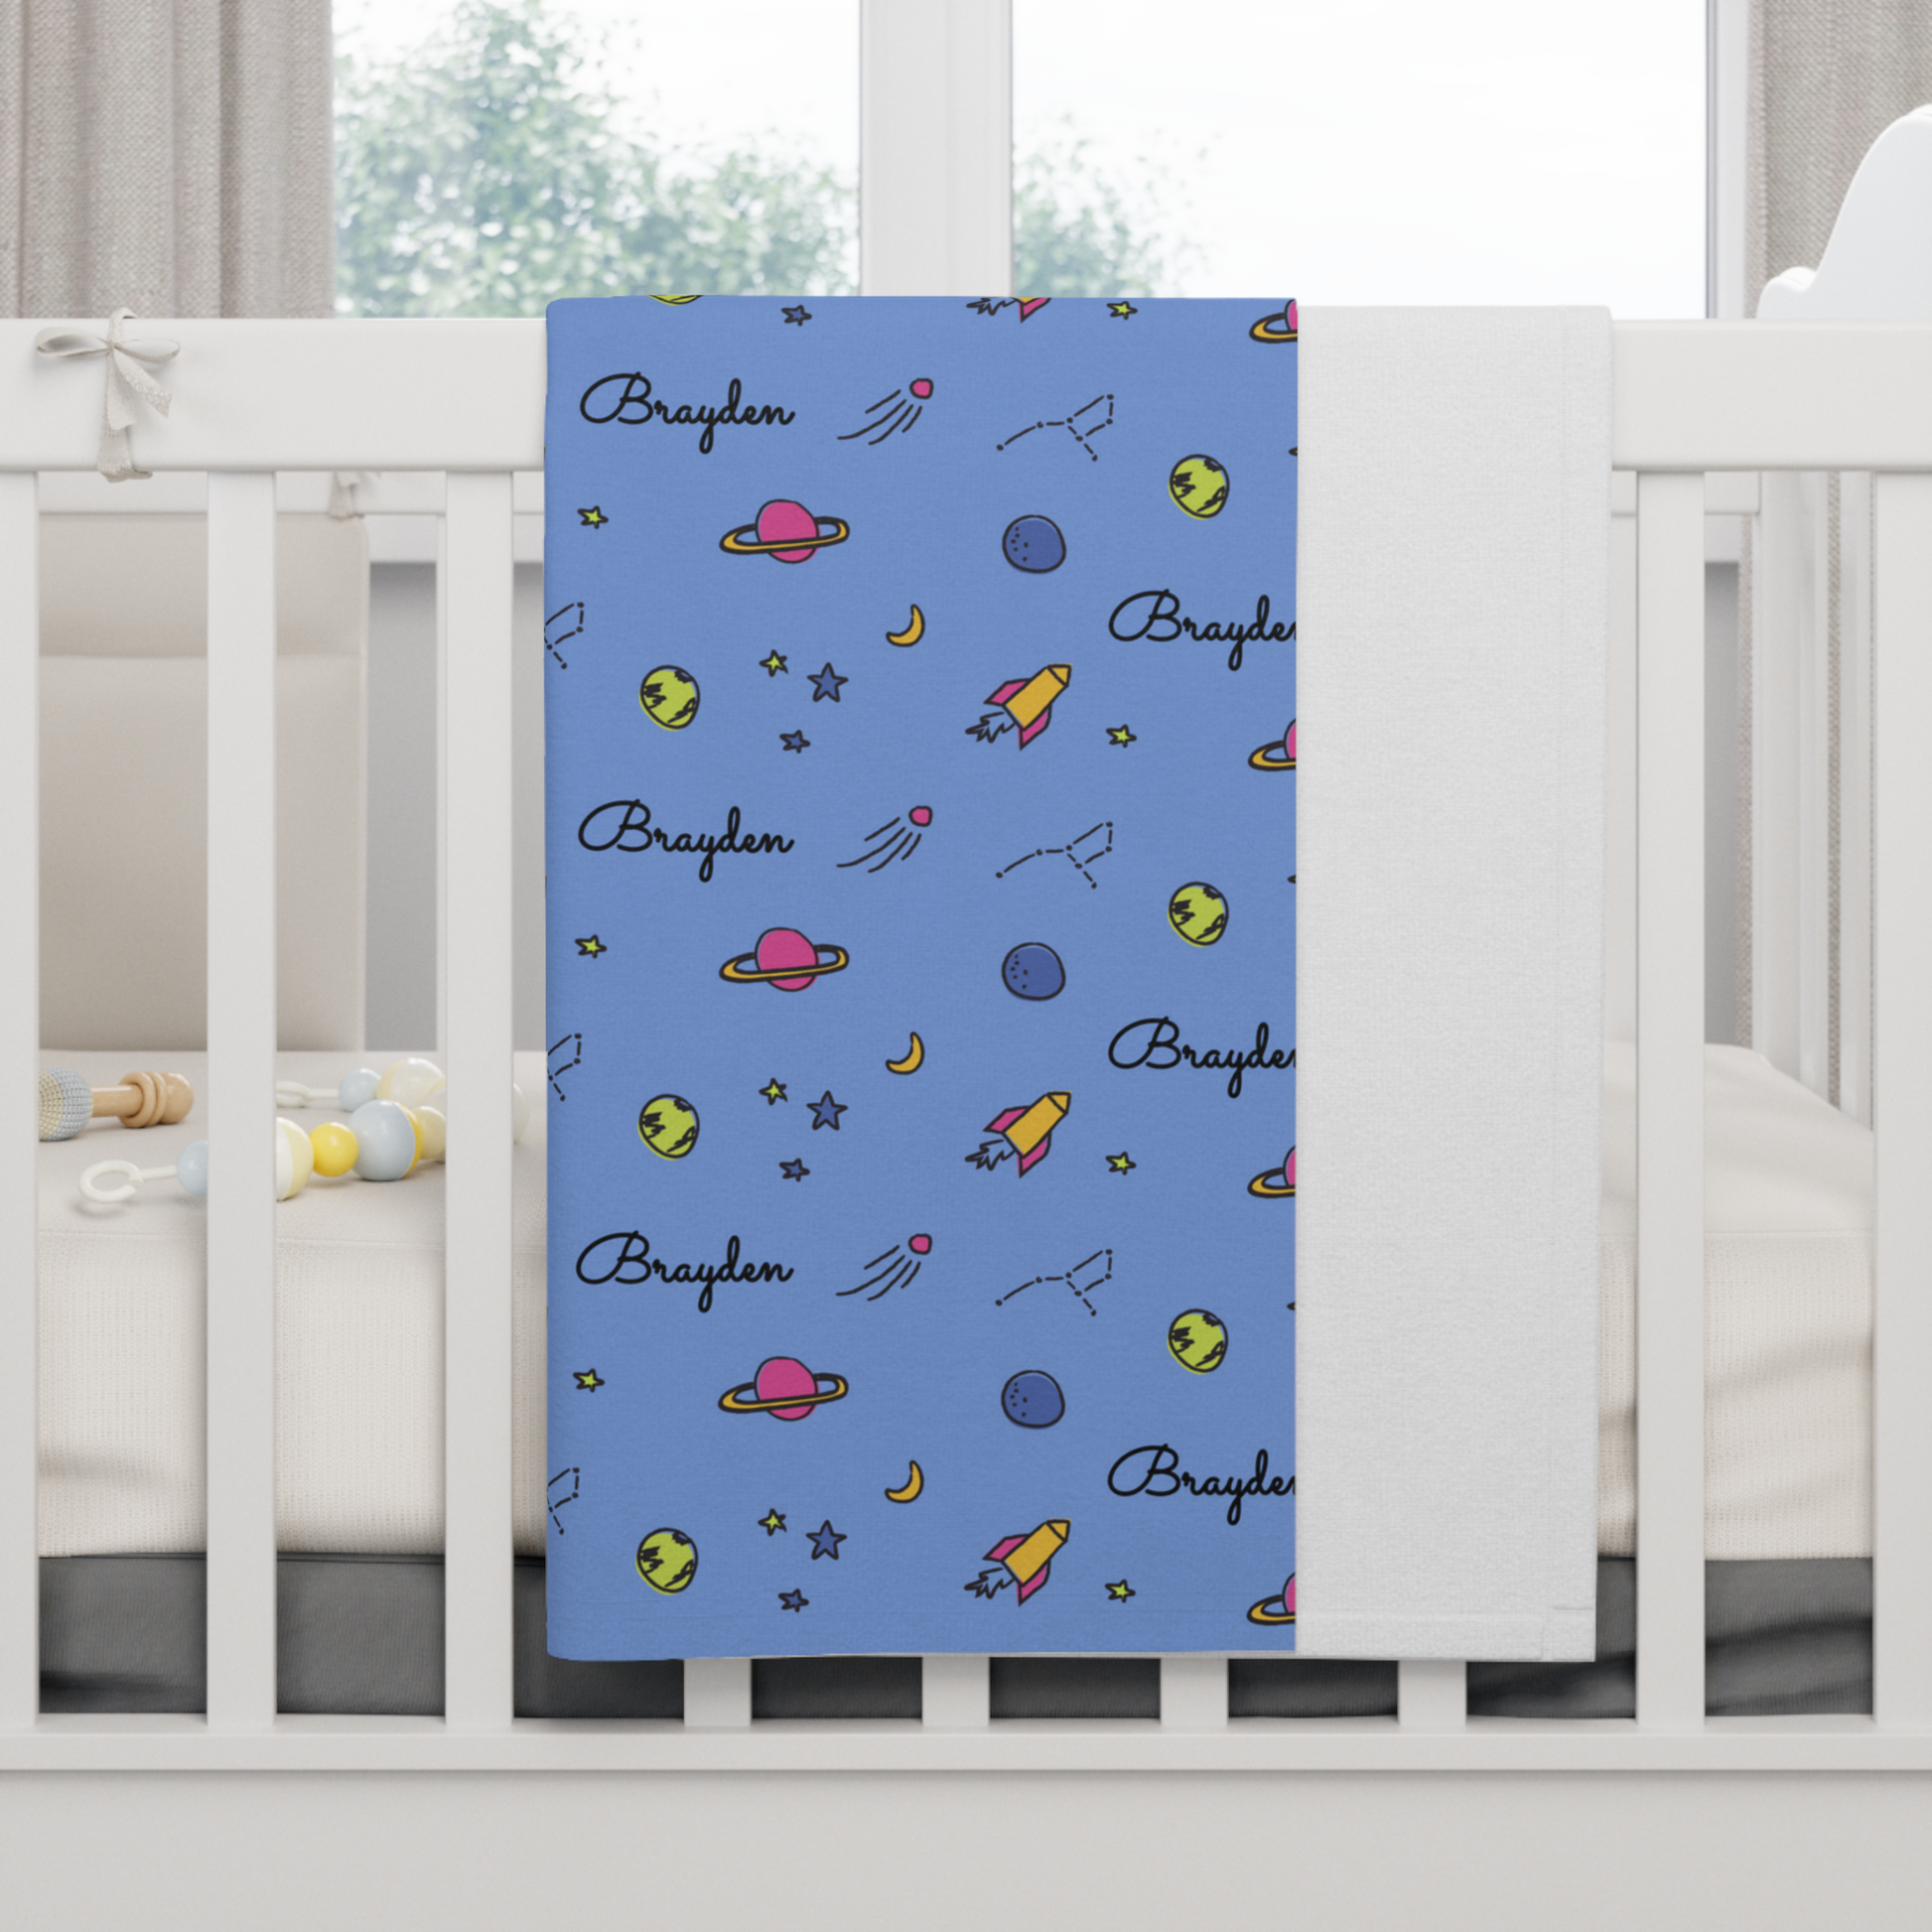 Fleece personalized baby blanket in space, rocket and stars pattern hung over side of white crib with window in the background